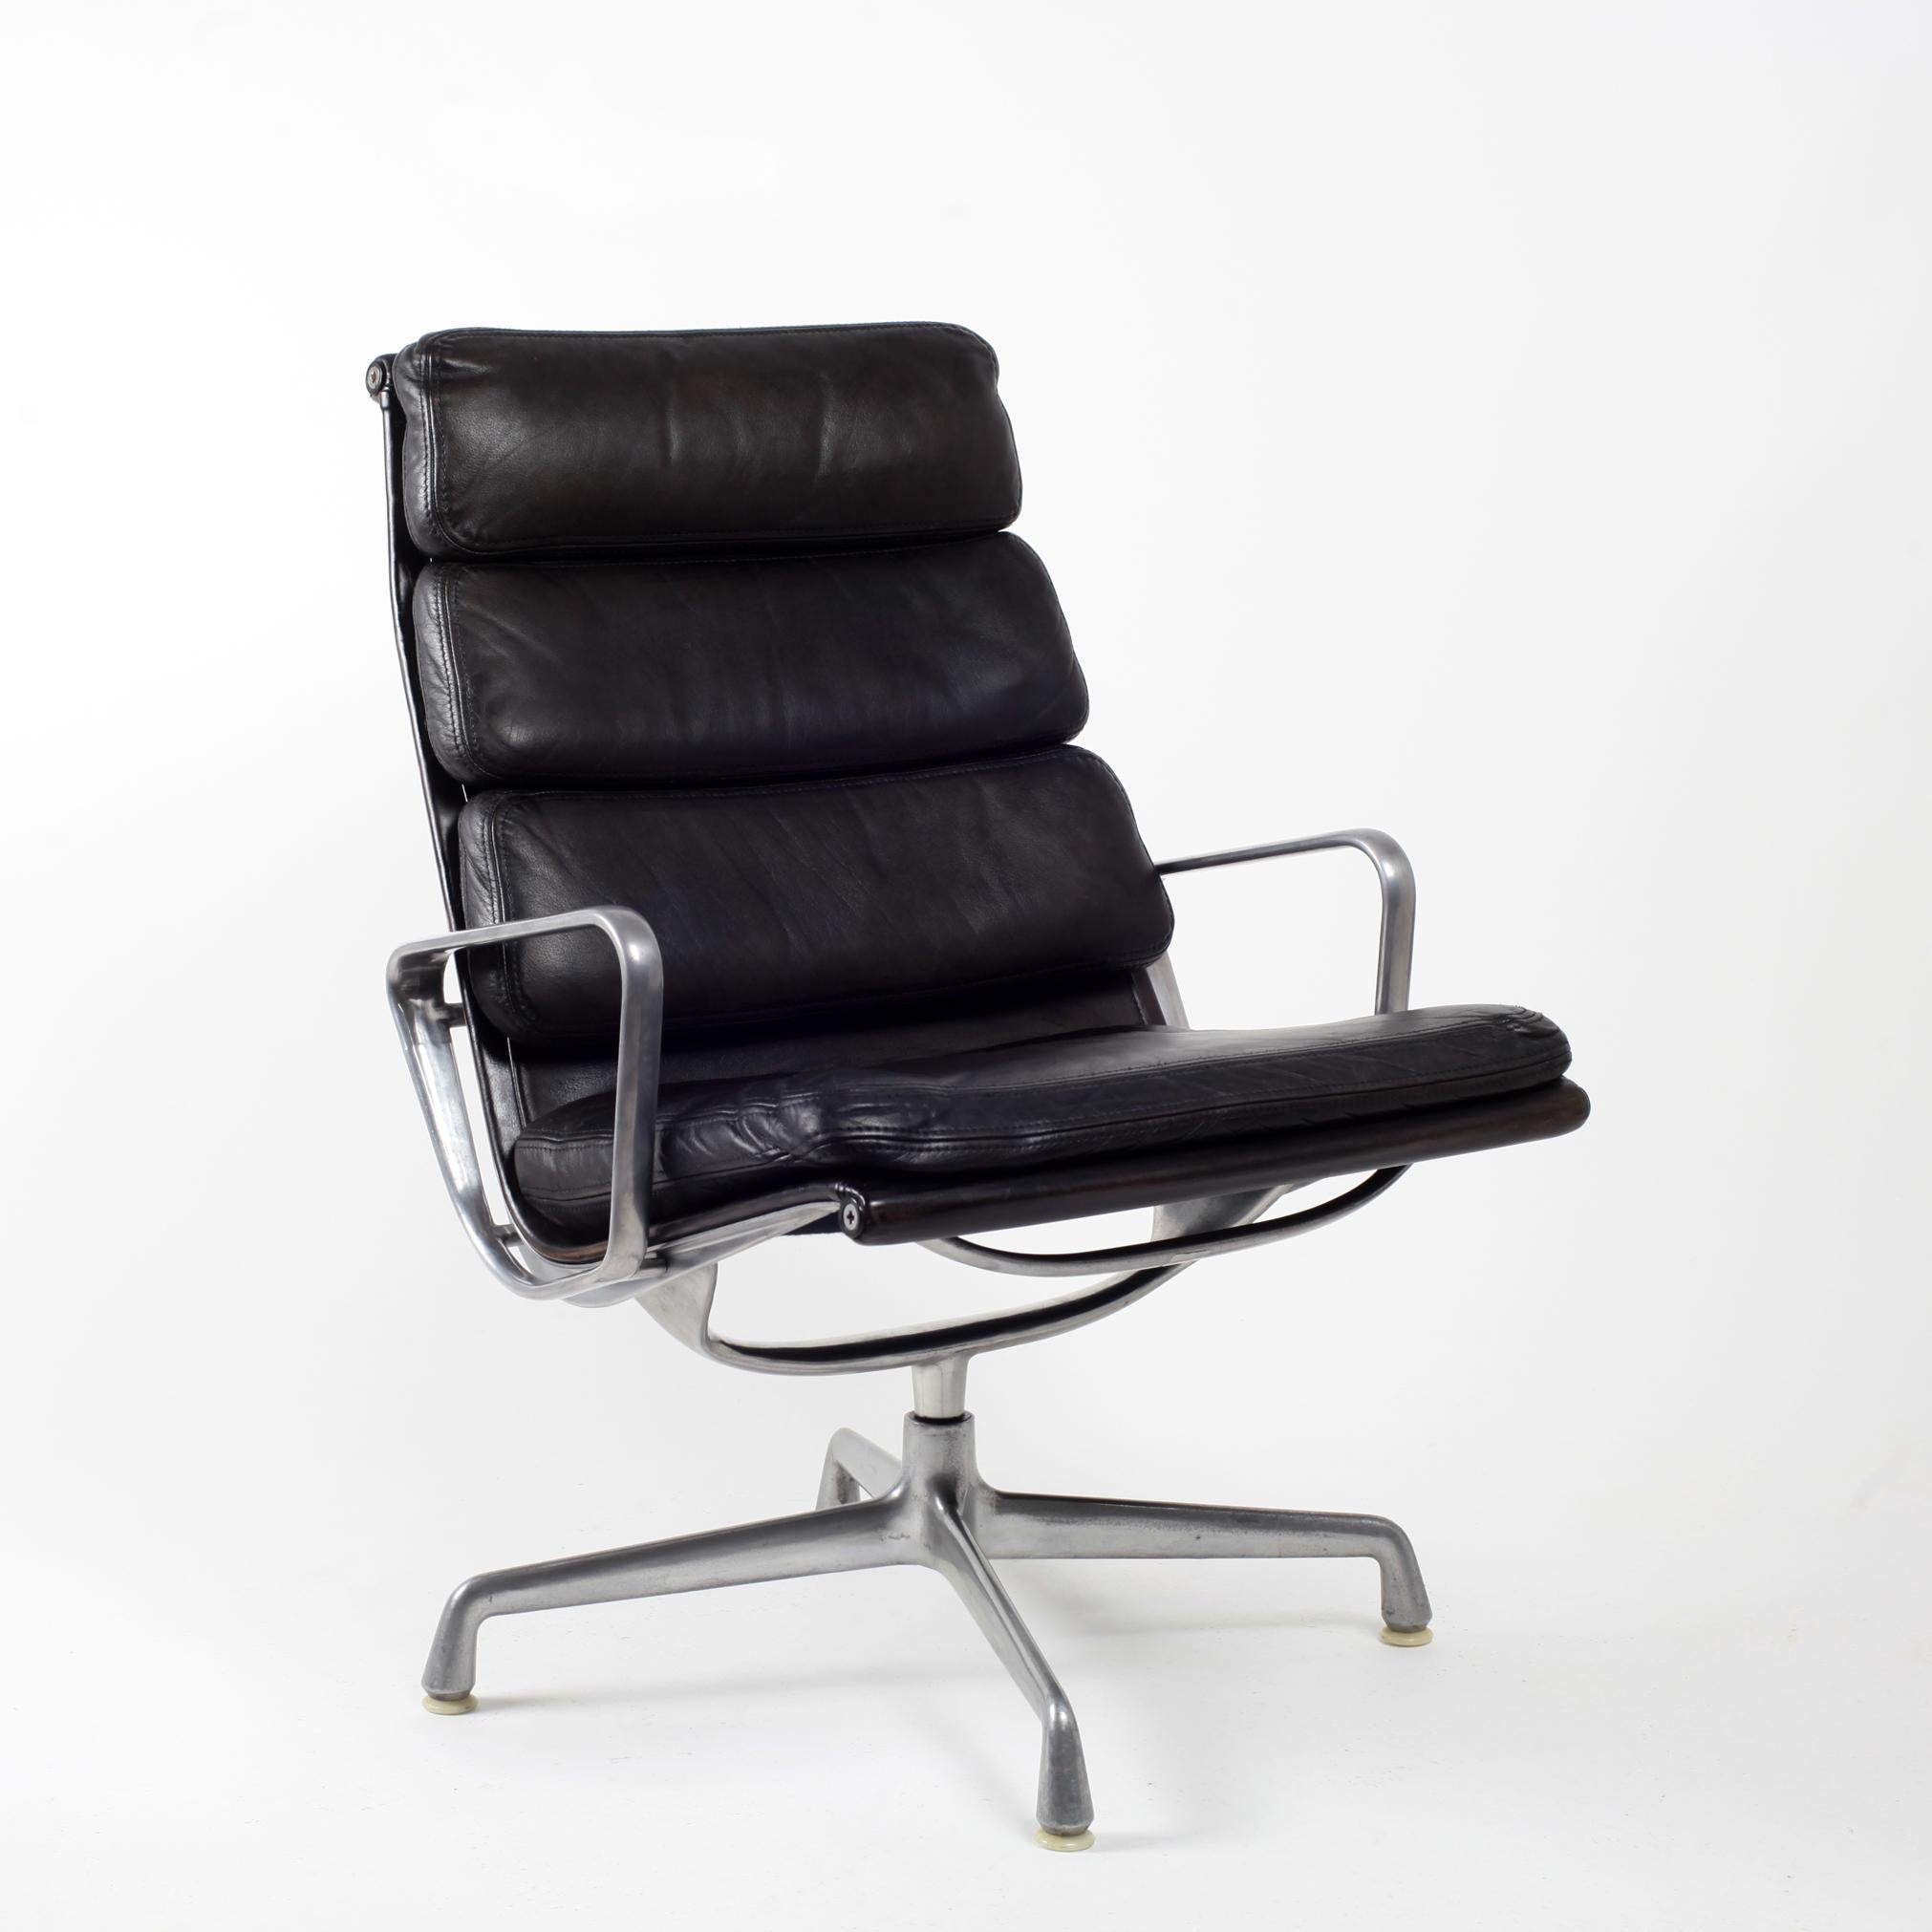 Eames black chocolate leather swivel soft pad lounge chair EA 216 by Interform for Herman Miller.
Very early edition in cast aluminium (not chrome).
Original glides.
Very nice patina.